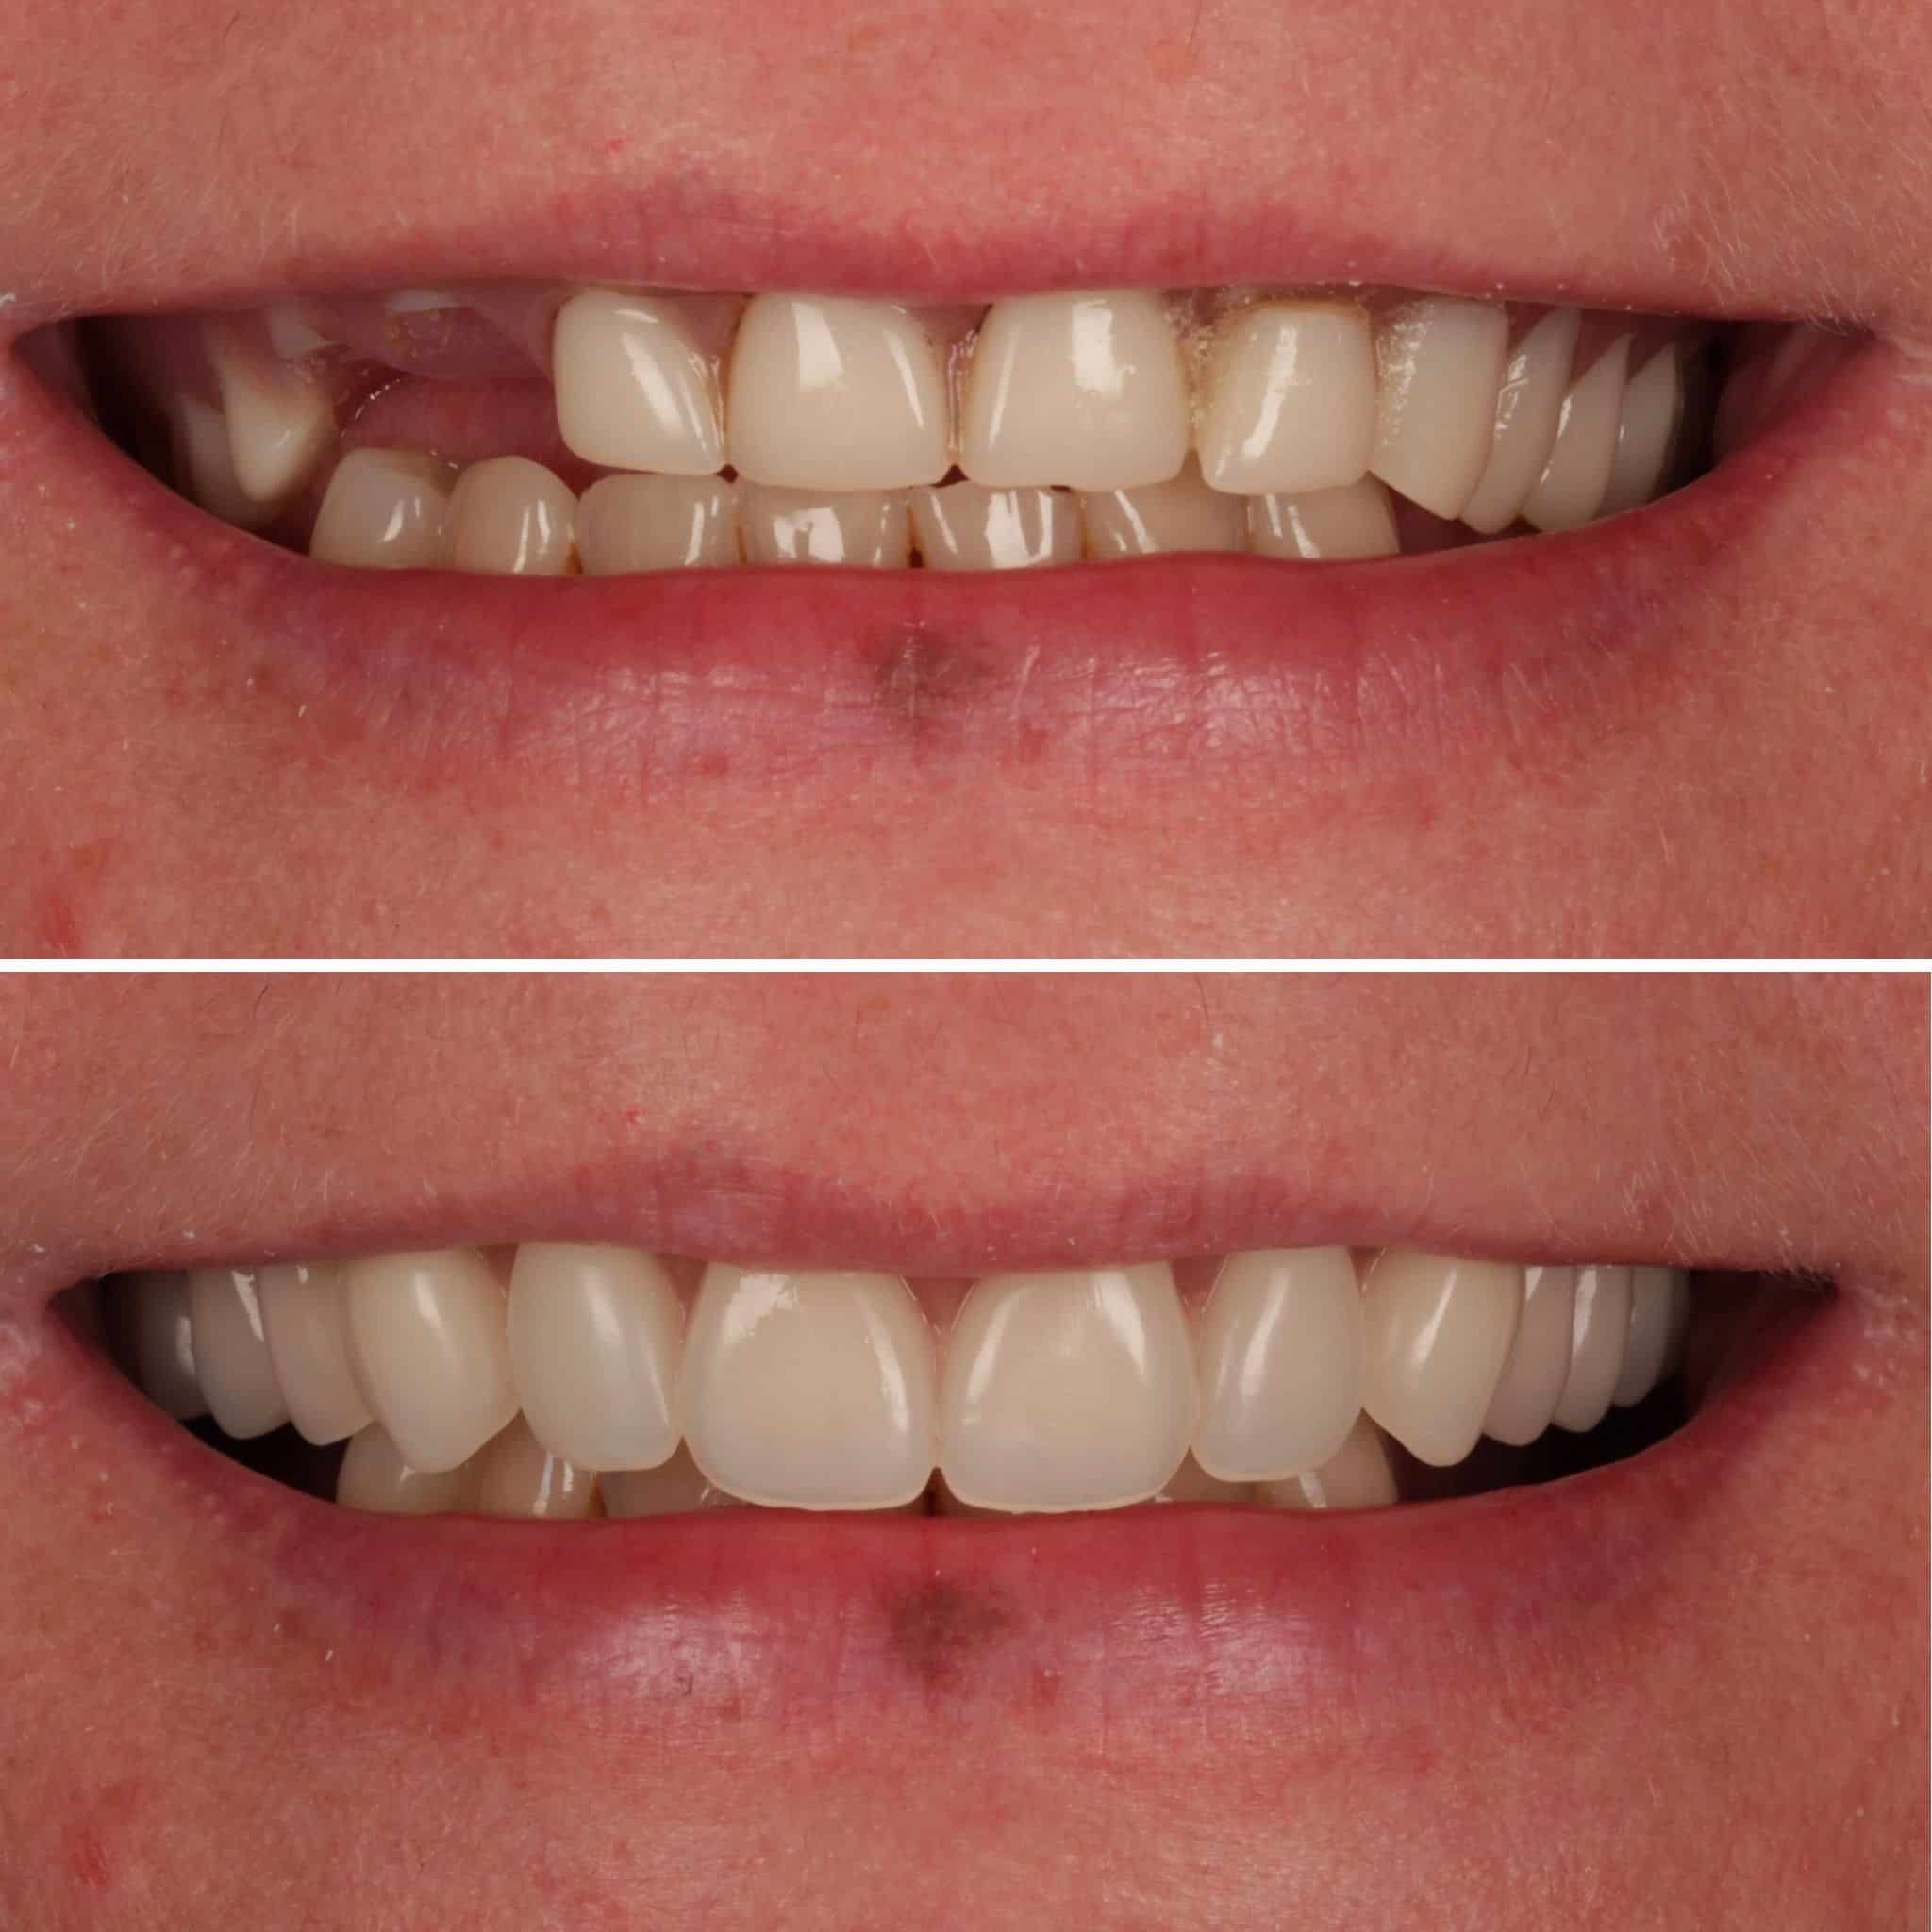 A smiling person with dentures experiencing a transformative smile in Decatur, GA.